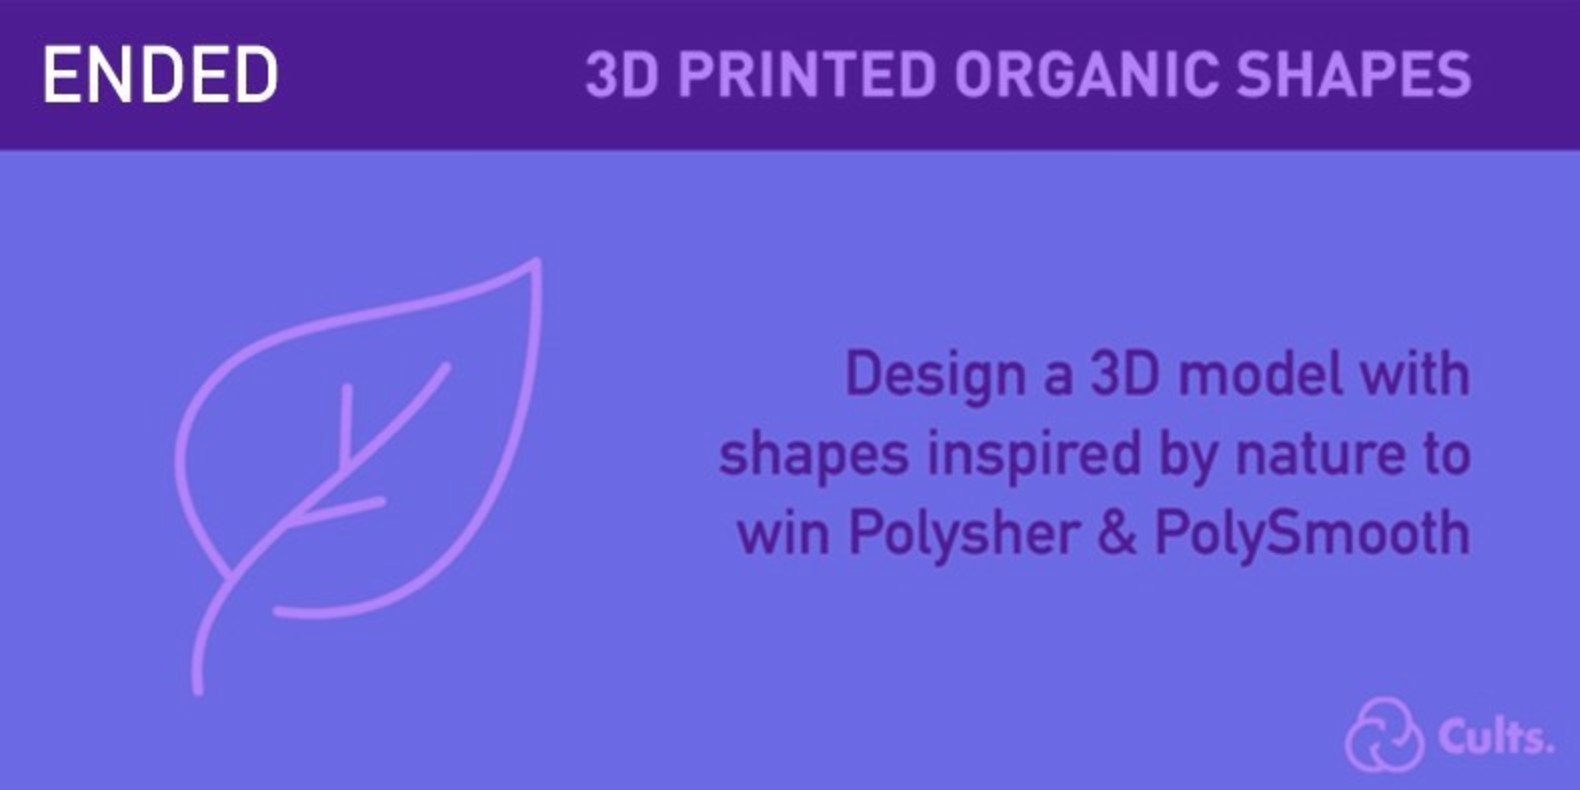 The challenge of design and 3D printing about Organic Shapes